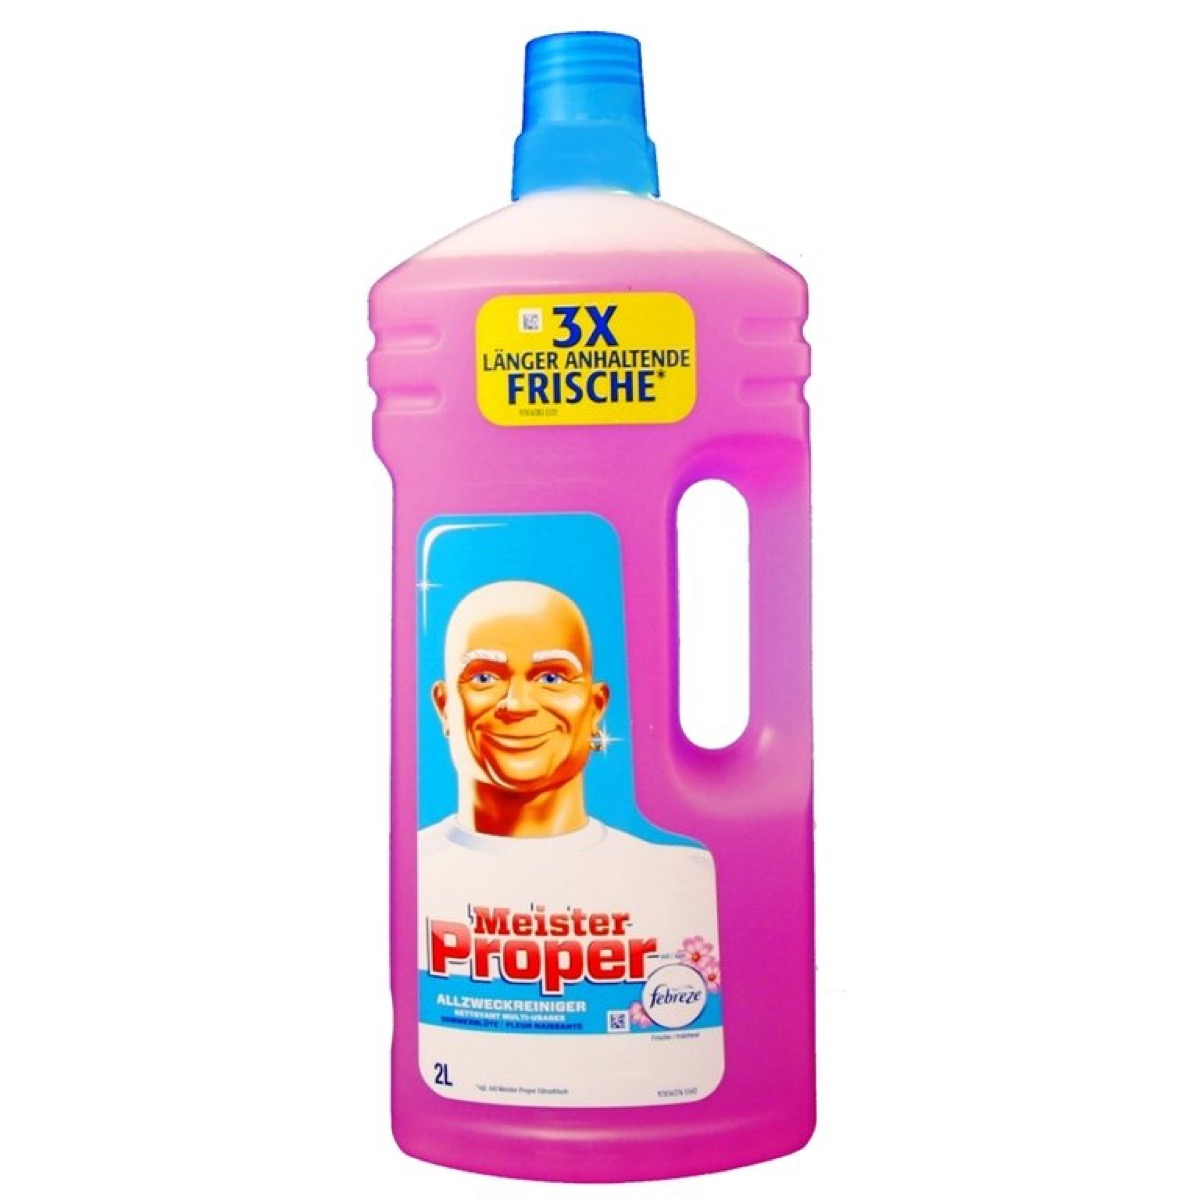 German Mr. Clean Product {Brands with Different Names Abroad} 